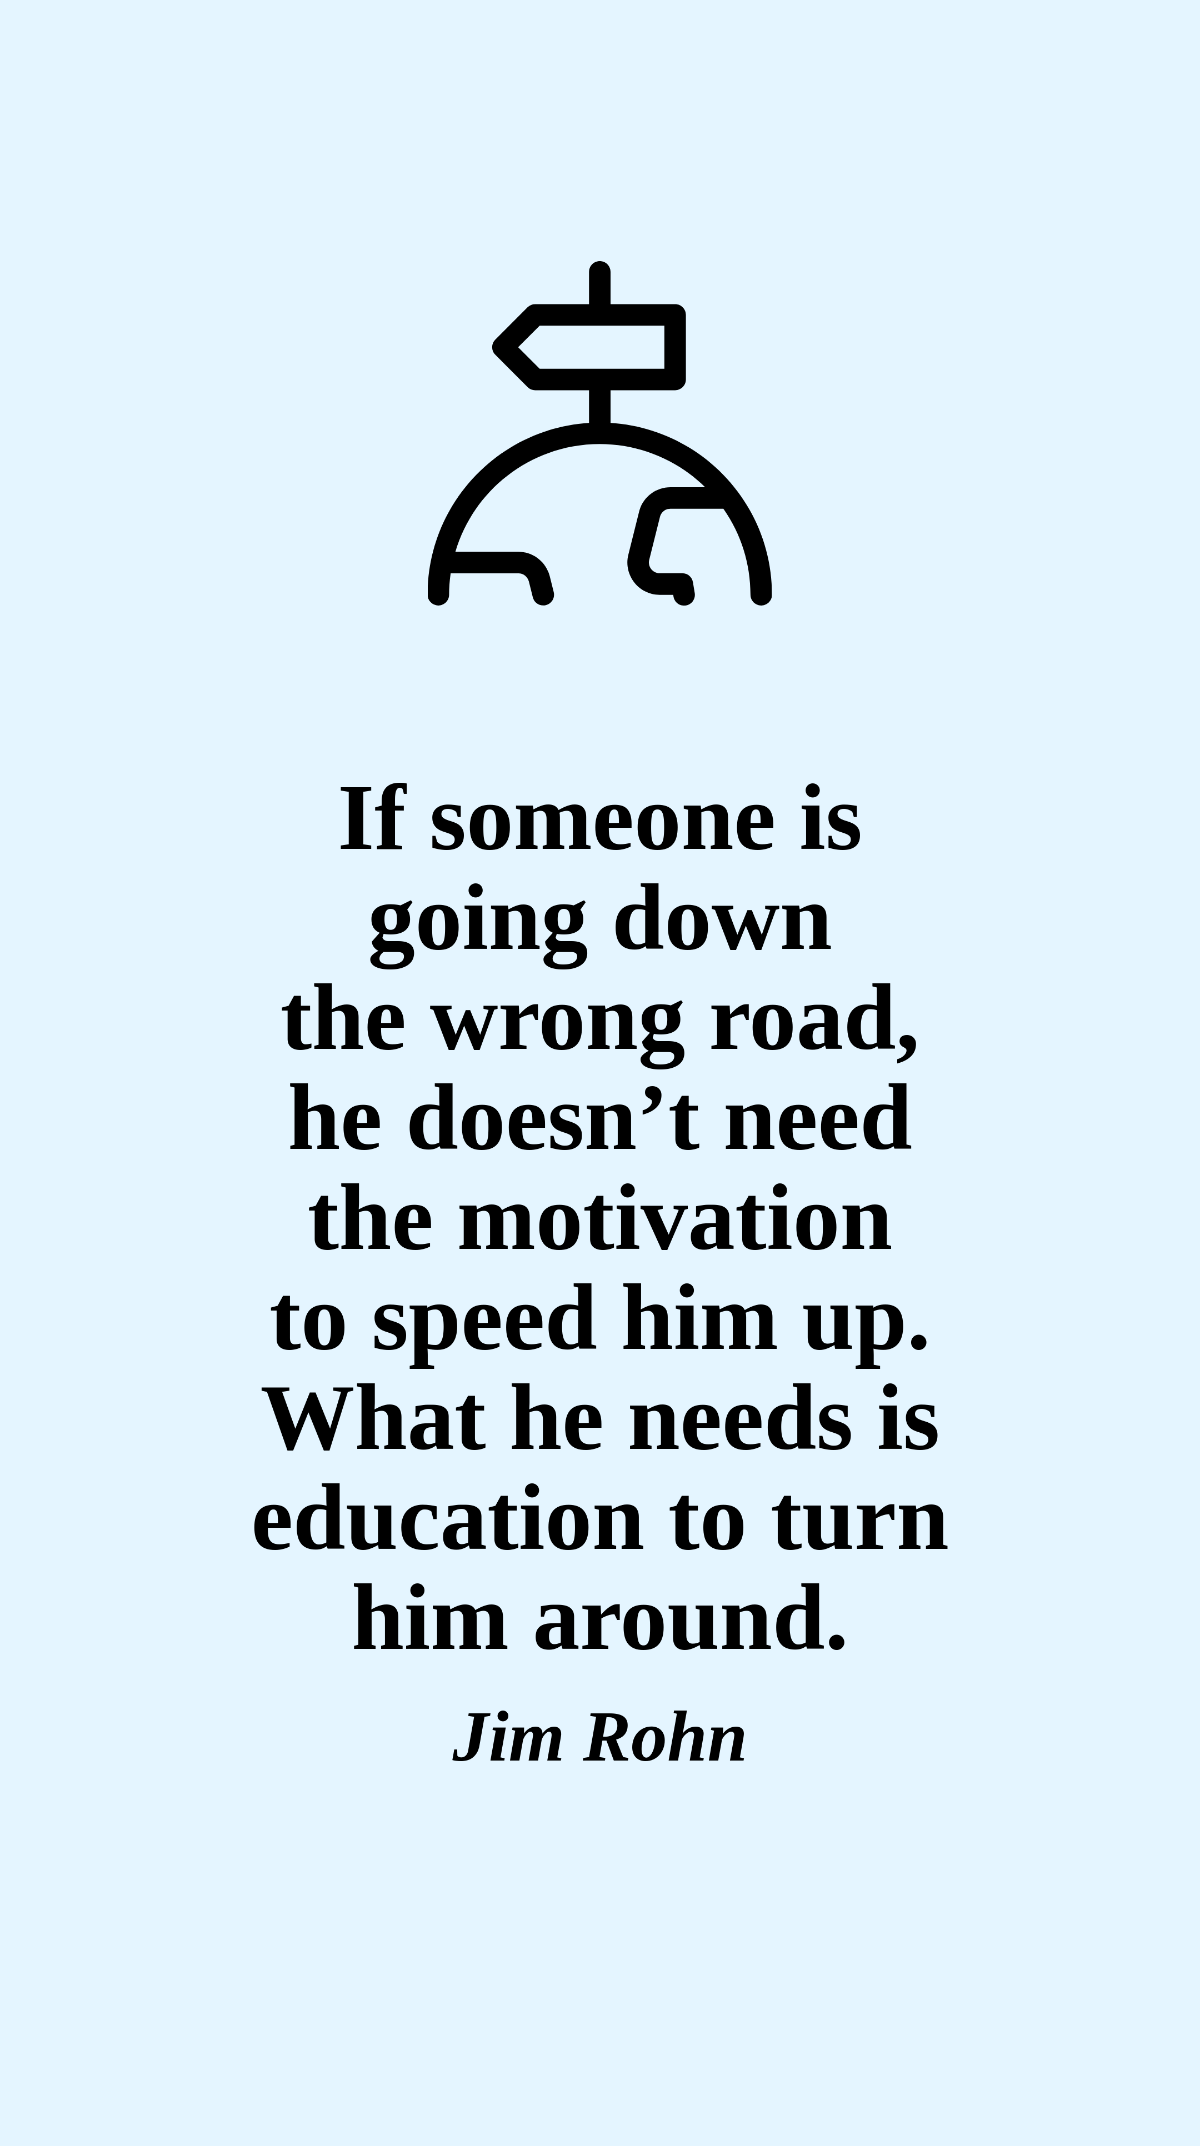 Jim Rohn - If someone is going down the wrong road, he doesn’t need the motivation to speed him up. What he needs is education to turn him around.